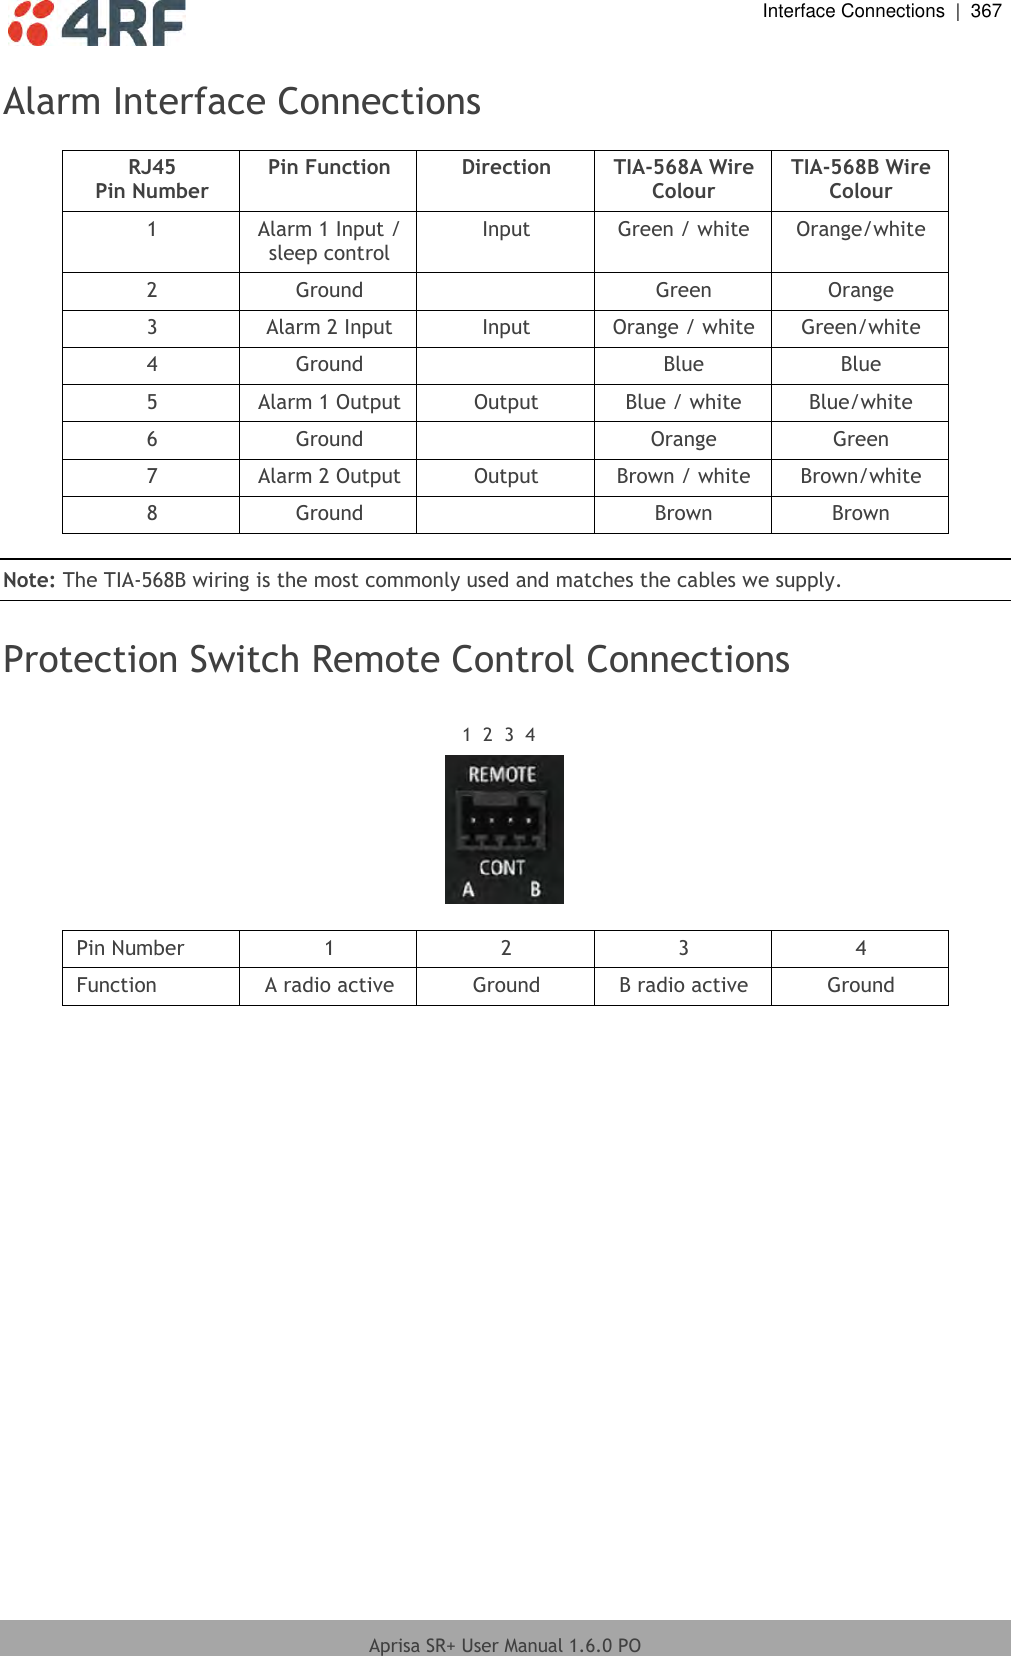  Interface Connections  |  367  Aprisa SR+ User Manual 1.6.0 PO  Alarm Interface Connections  RJ45 Pin Number Pin Function Direction TIA-568A Wire Colour TIA-568B Wire Colour 1 Alarm 1 Input / sleep control Input Green / white Orange/white 2 Ground  Green Orange 3 Alarm 2 Input Input Orange / white Green/white 4 Ground  Blue Blue 5 Alarm 1 Output Output Blue / white Blue/white 6 Ground  Orange Green 7 Alarm 2 Output Output Brown / white Brown/white 8 Ground  Brown Brown  Note: The TIA-568B wiring is the most commonly used and matches the cables we supply.  Protection Switch Remote Control Connections        1  2  3  4   Pin Number 1 2 3 4 Function A radio active Ground B radio active Ground  